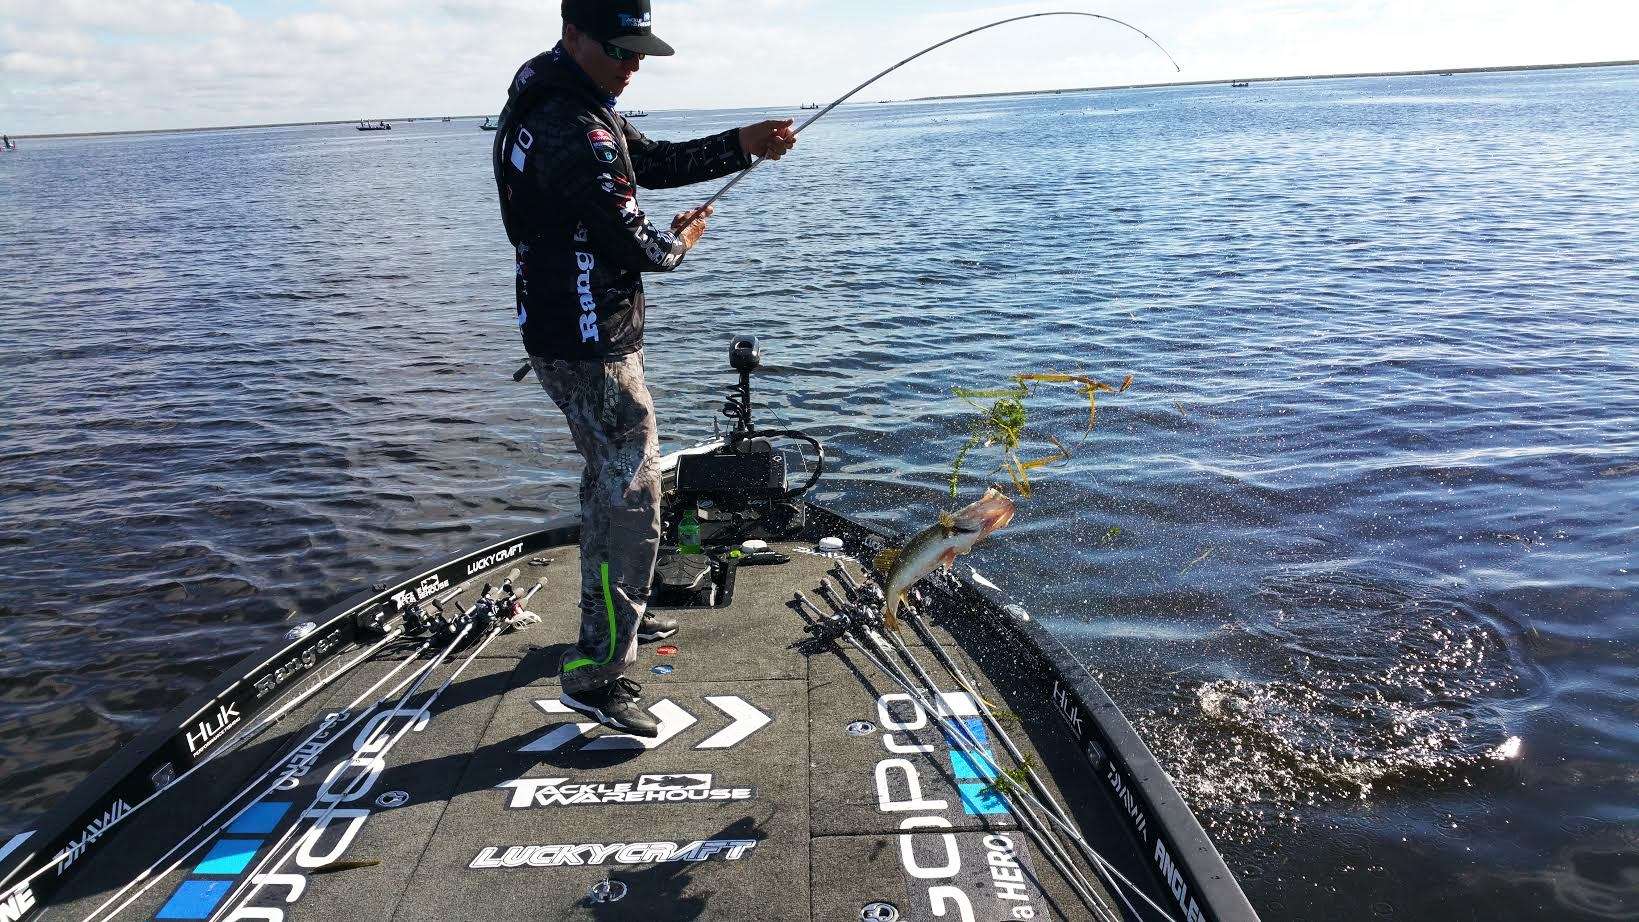 Ehrler got keeper No. 5 a few casts after No. 4. Nice quick little flurry to fill out his limit. He has the rest of the day to upgrade, and on this lake, chances are it could happen big time.